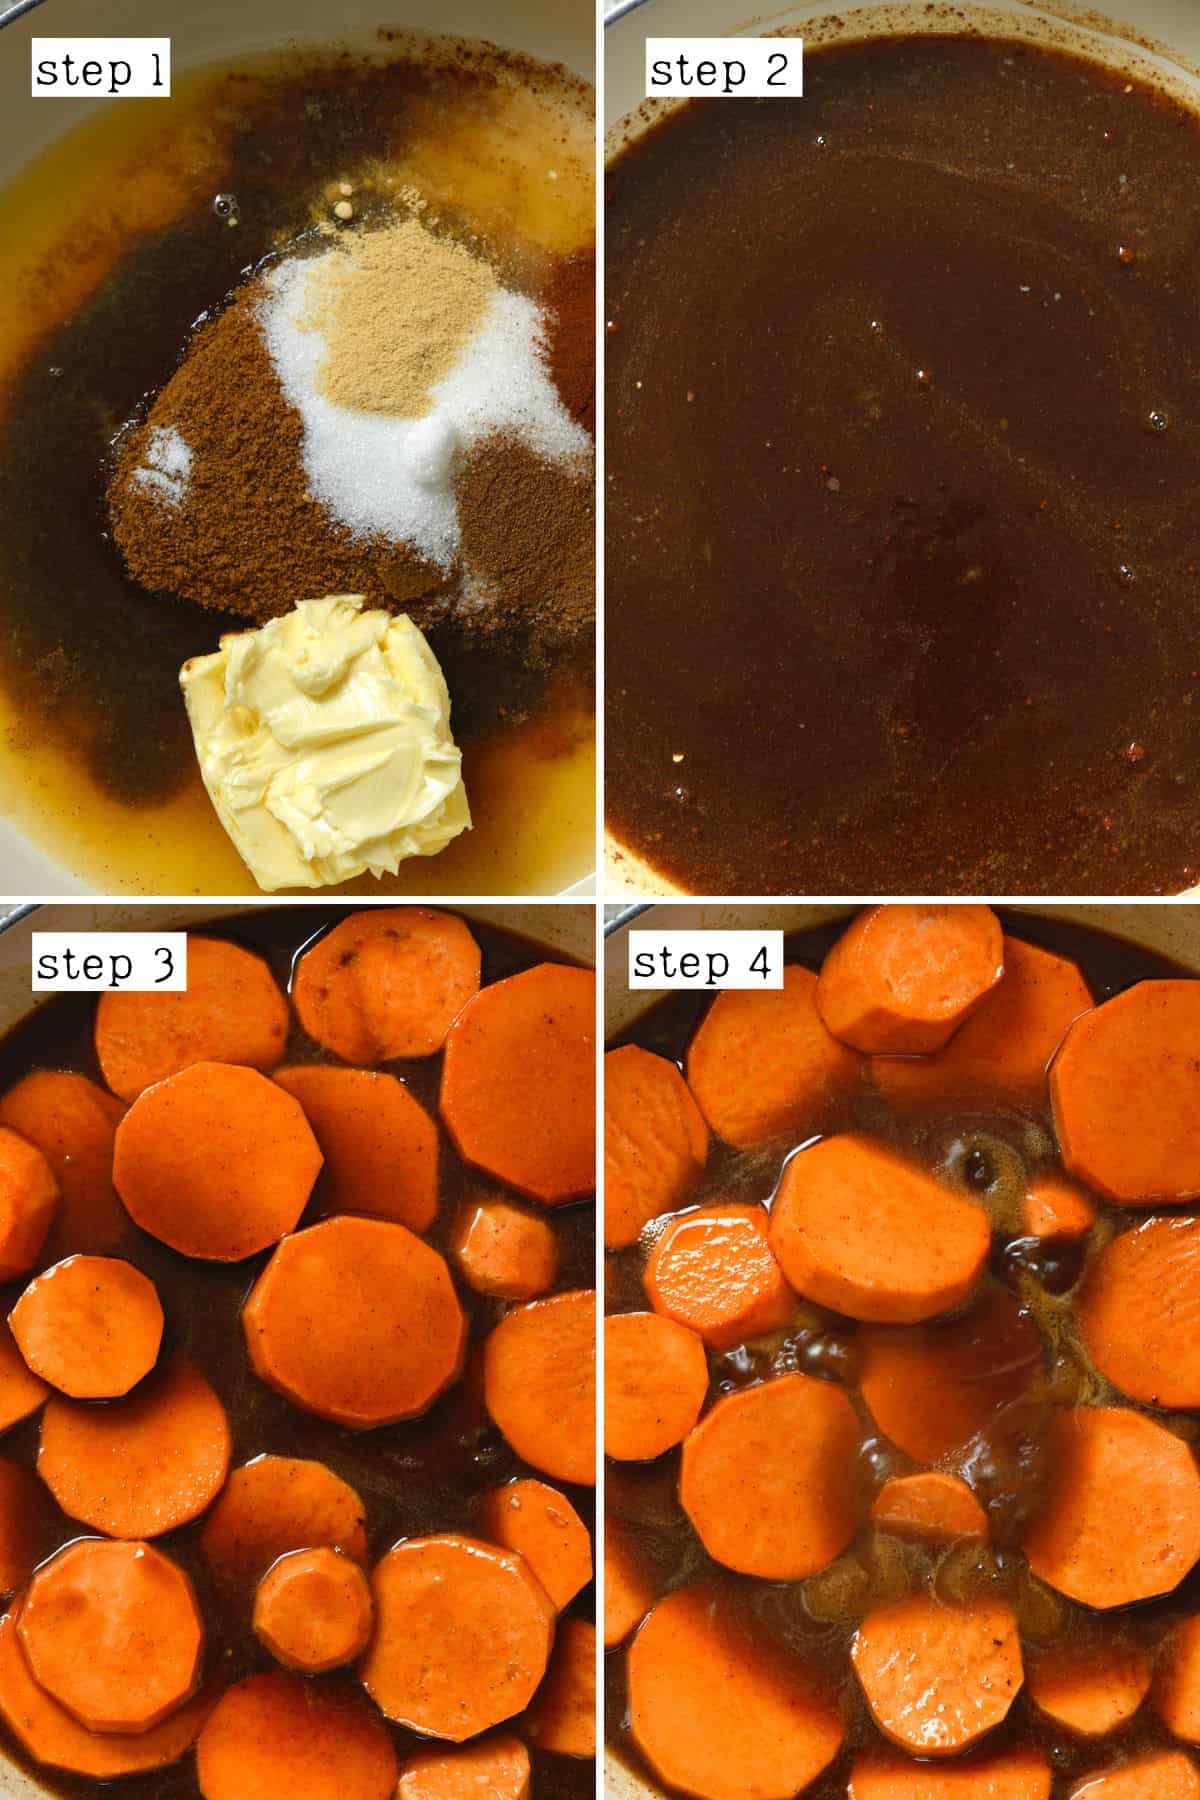 Steps for cooking yams with spices and butter